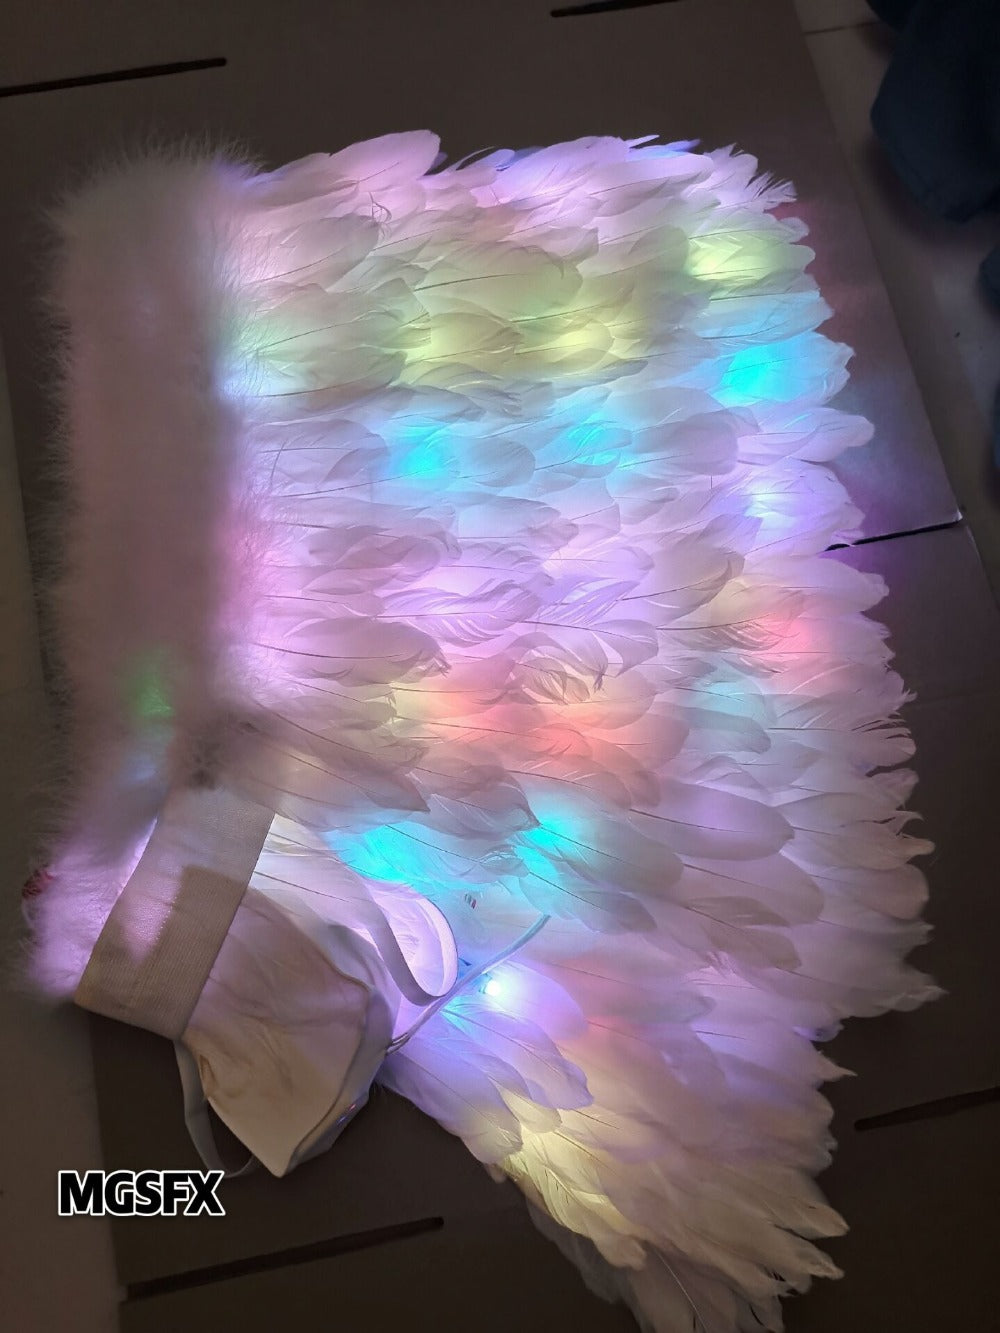 Program LED Light up Feather wings